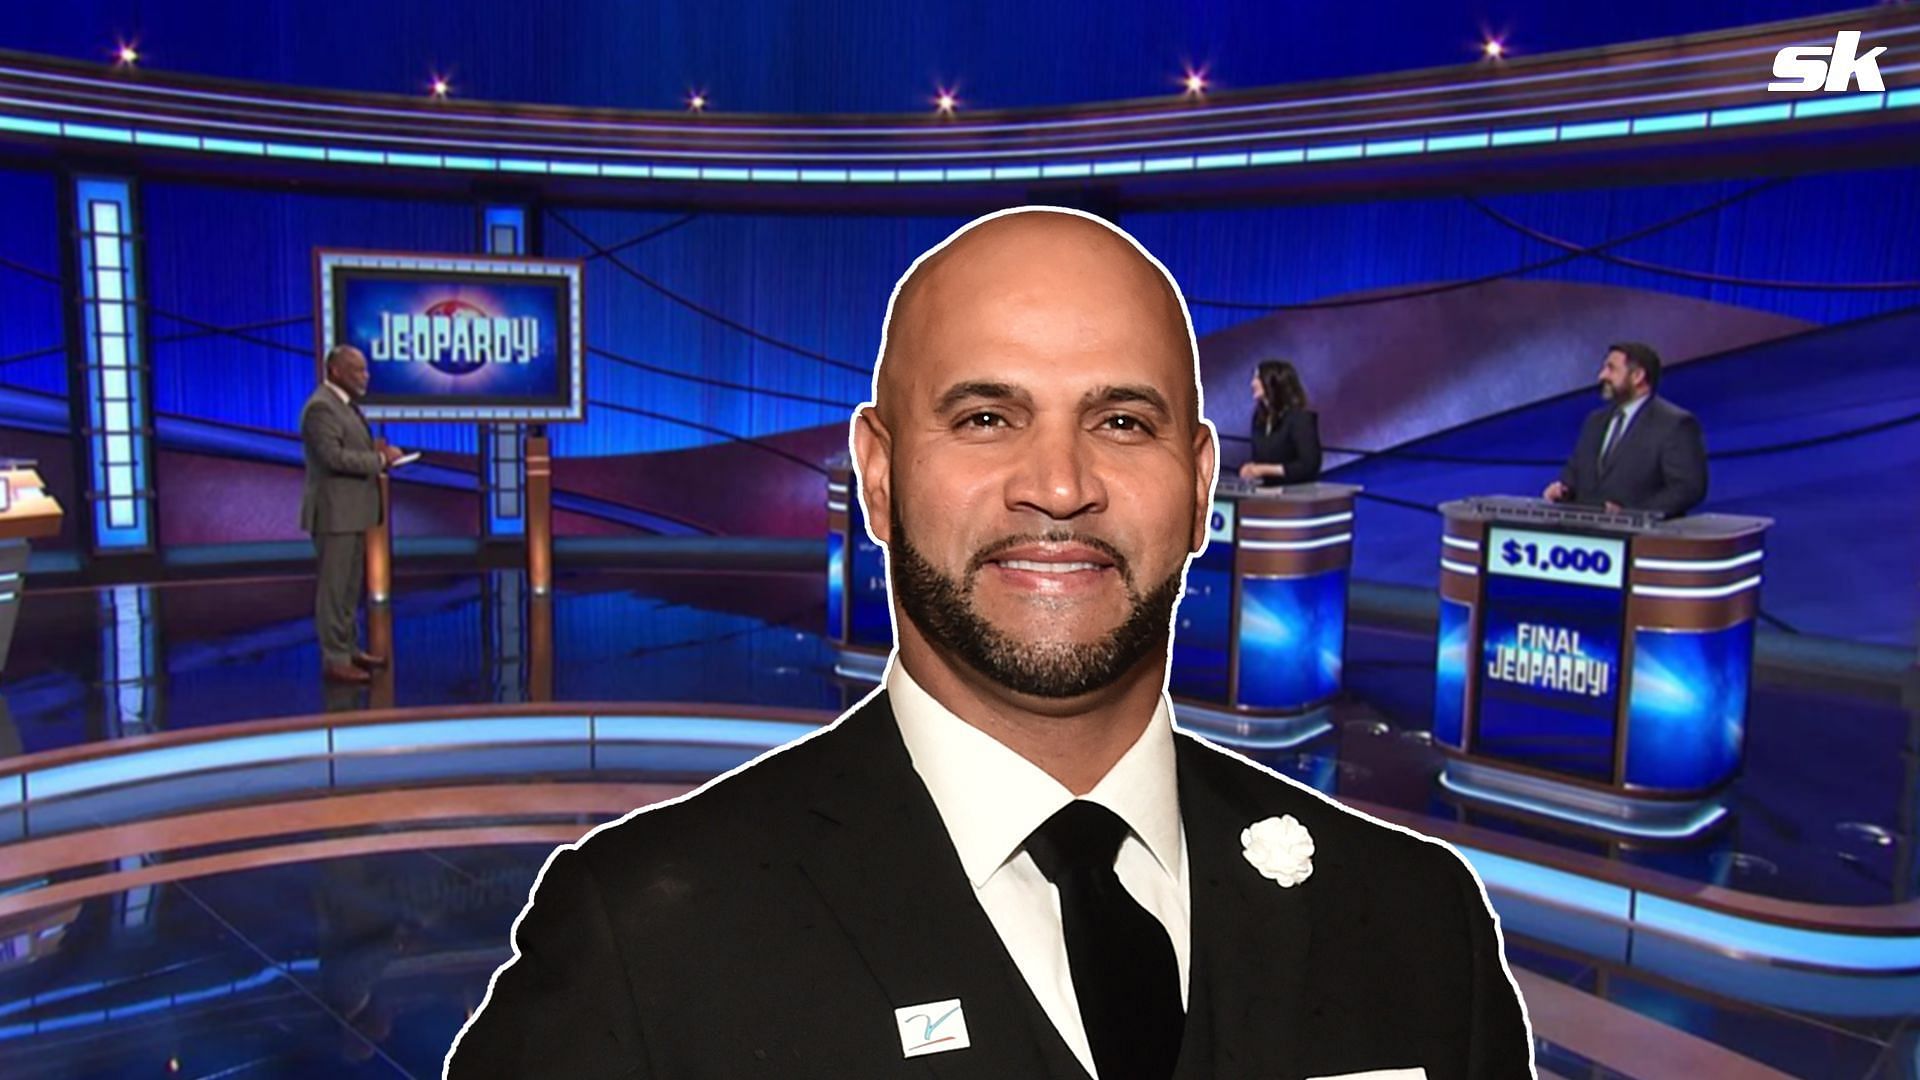 A Jeopardy! contestant invoked rage against Albert Pujols while giving his answer